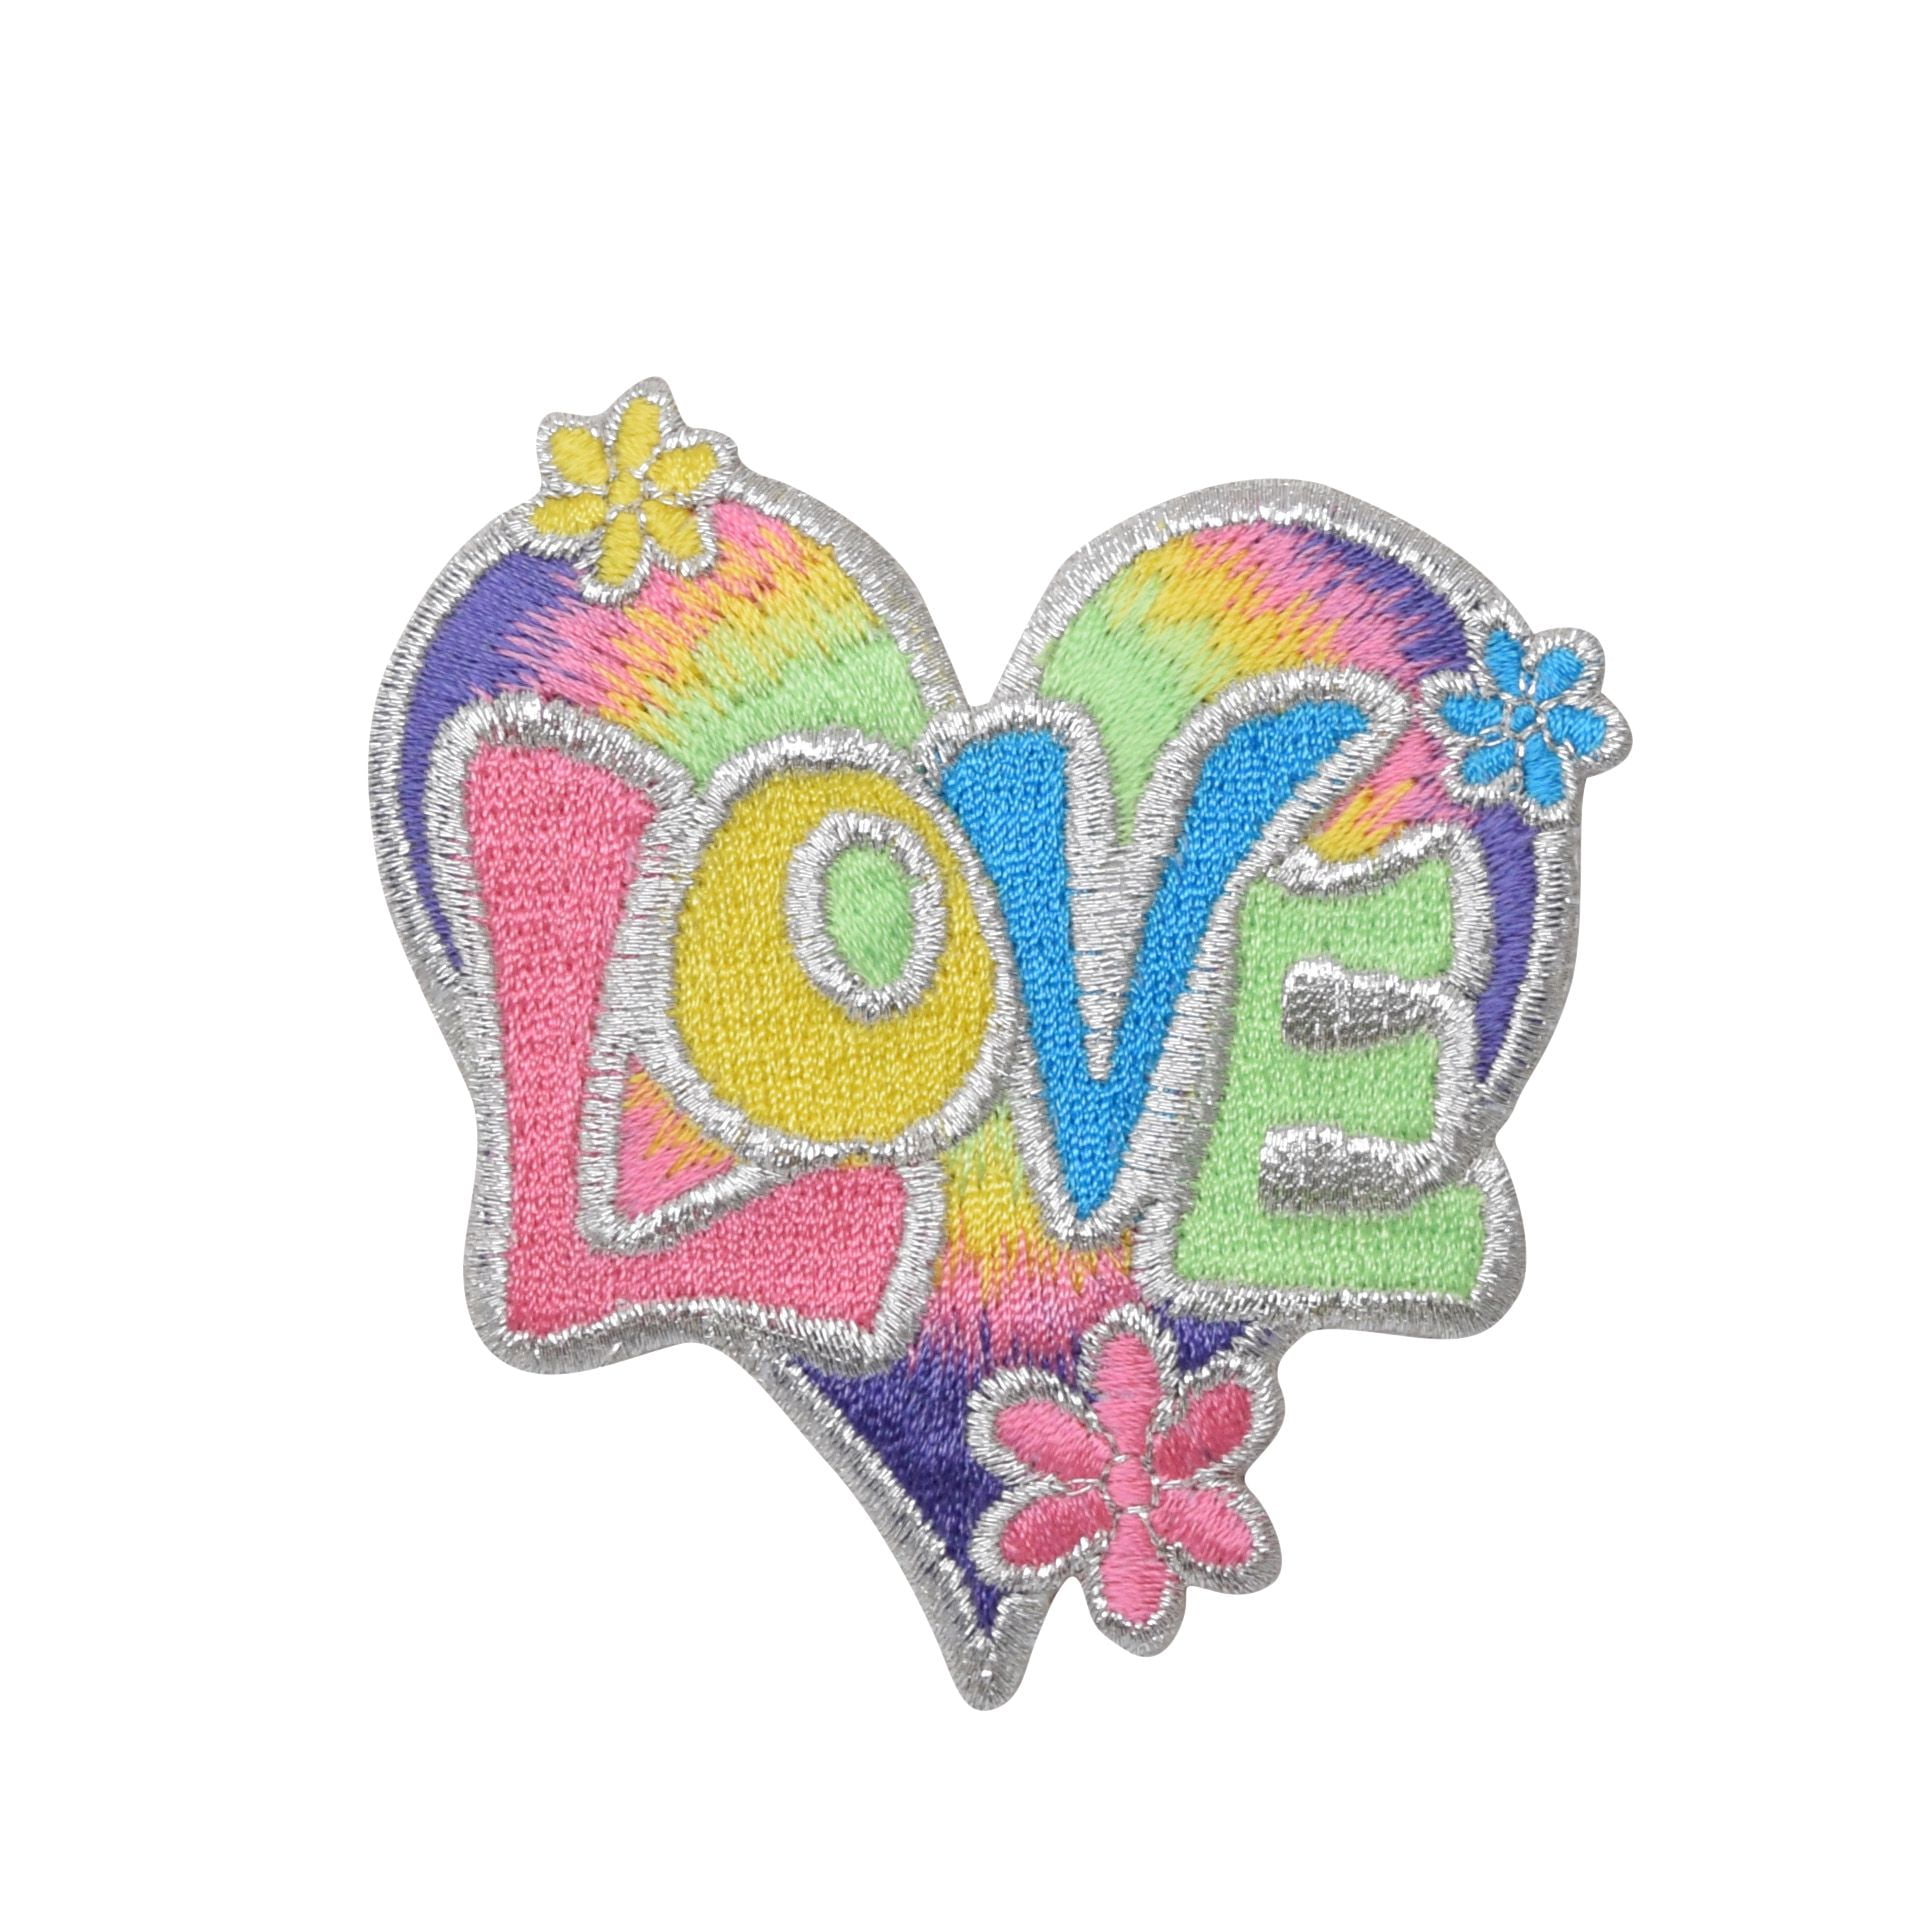 Iron-On Love Heart Embroidered Patch 40 Pcs Cute Fabric Mini Heart Patches Repair Decorations Sew On Patch DIY Clothing Craft Decoration Accessories Beige